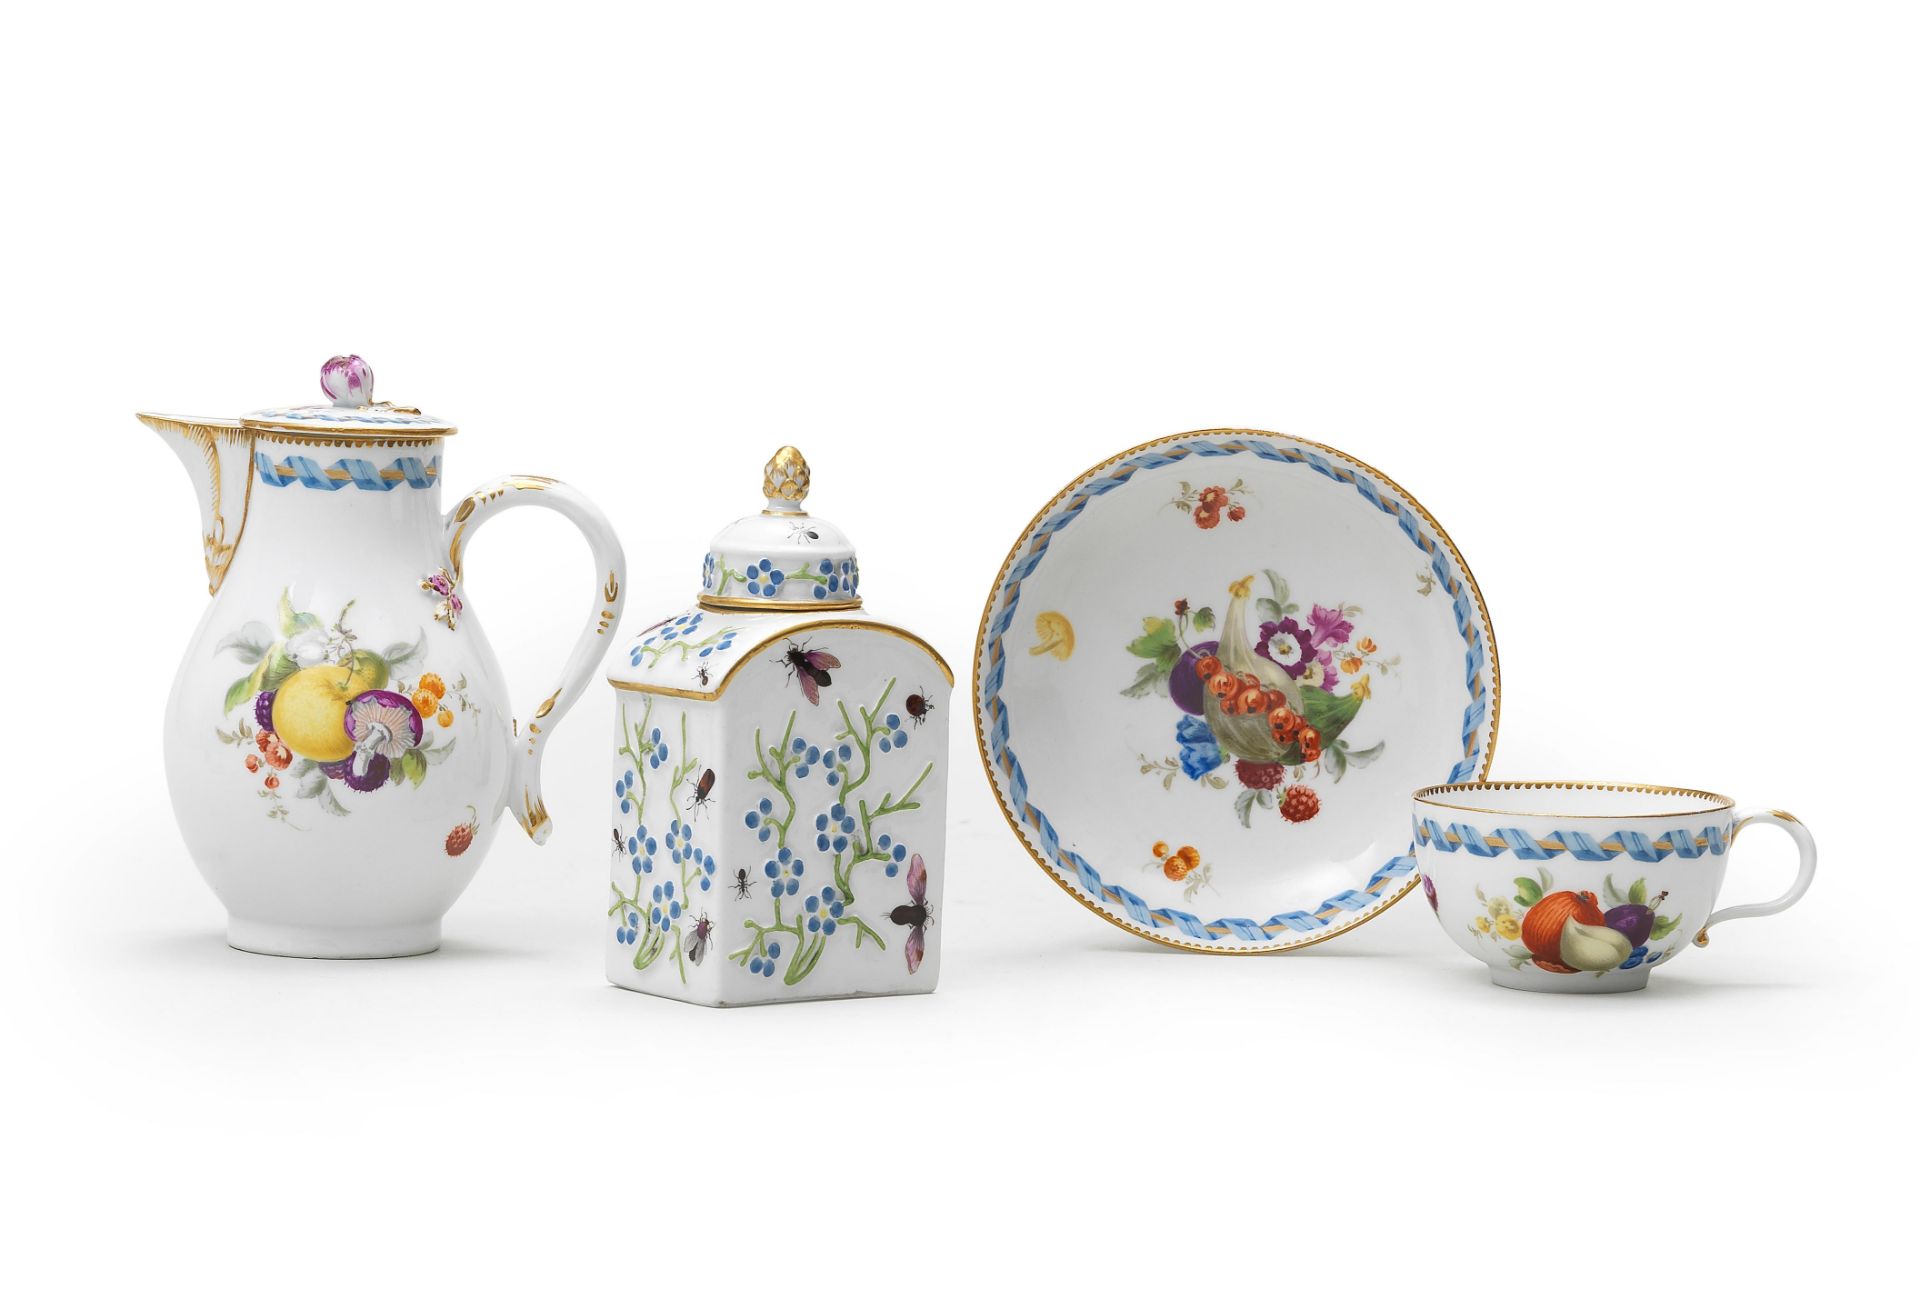 A Marcolini Meissen milk jug and cover and a teacup and saucer, late 18th century; together with ...